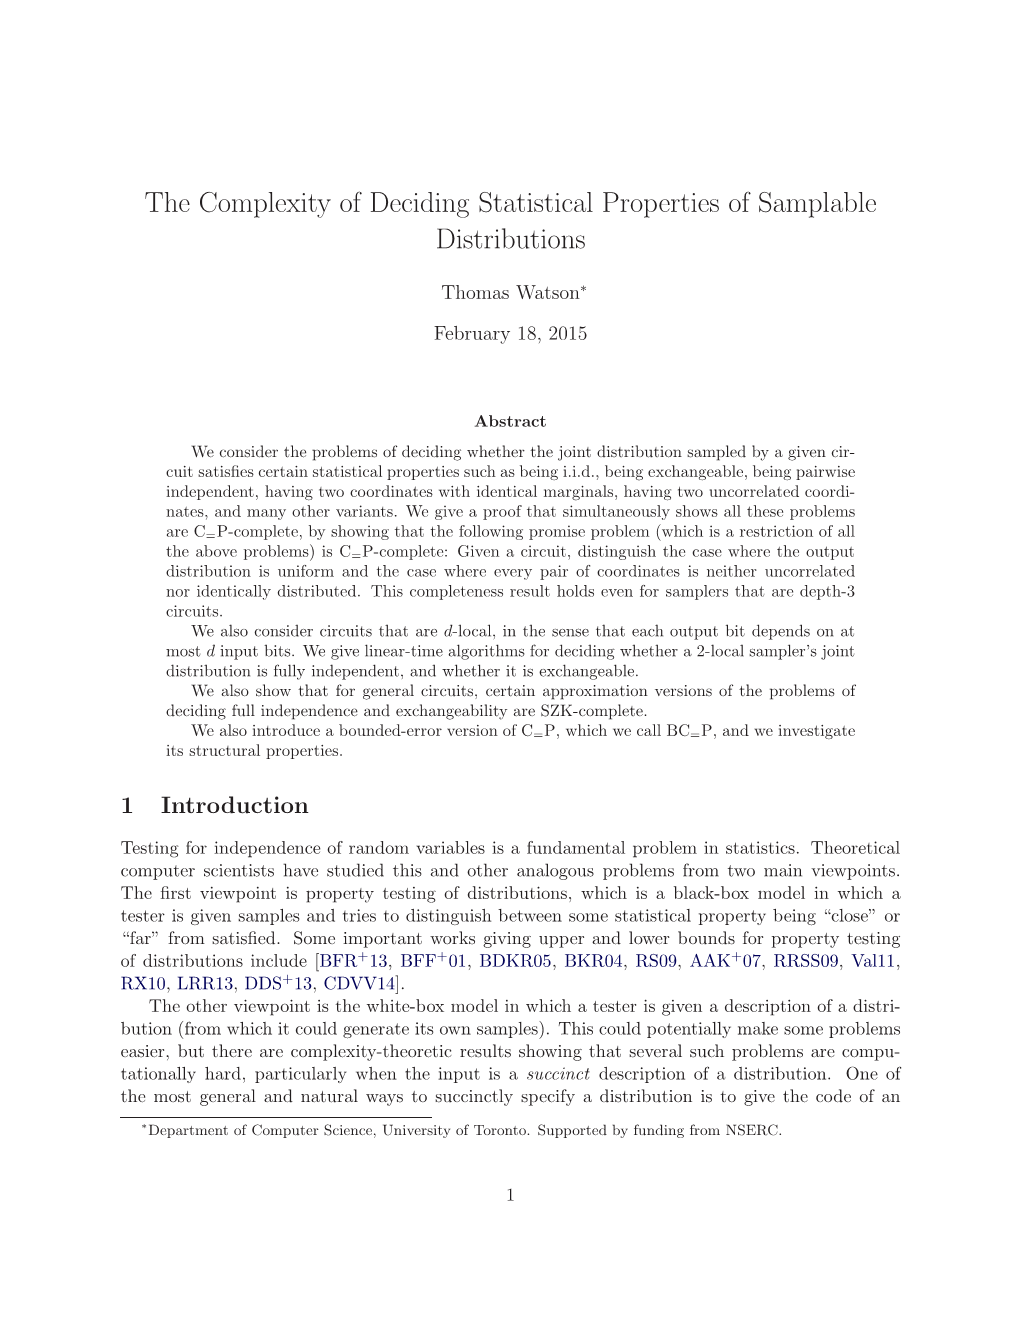 The Complexity of Deciding Statistical Properties of Samplable Distributions